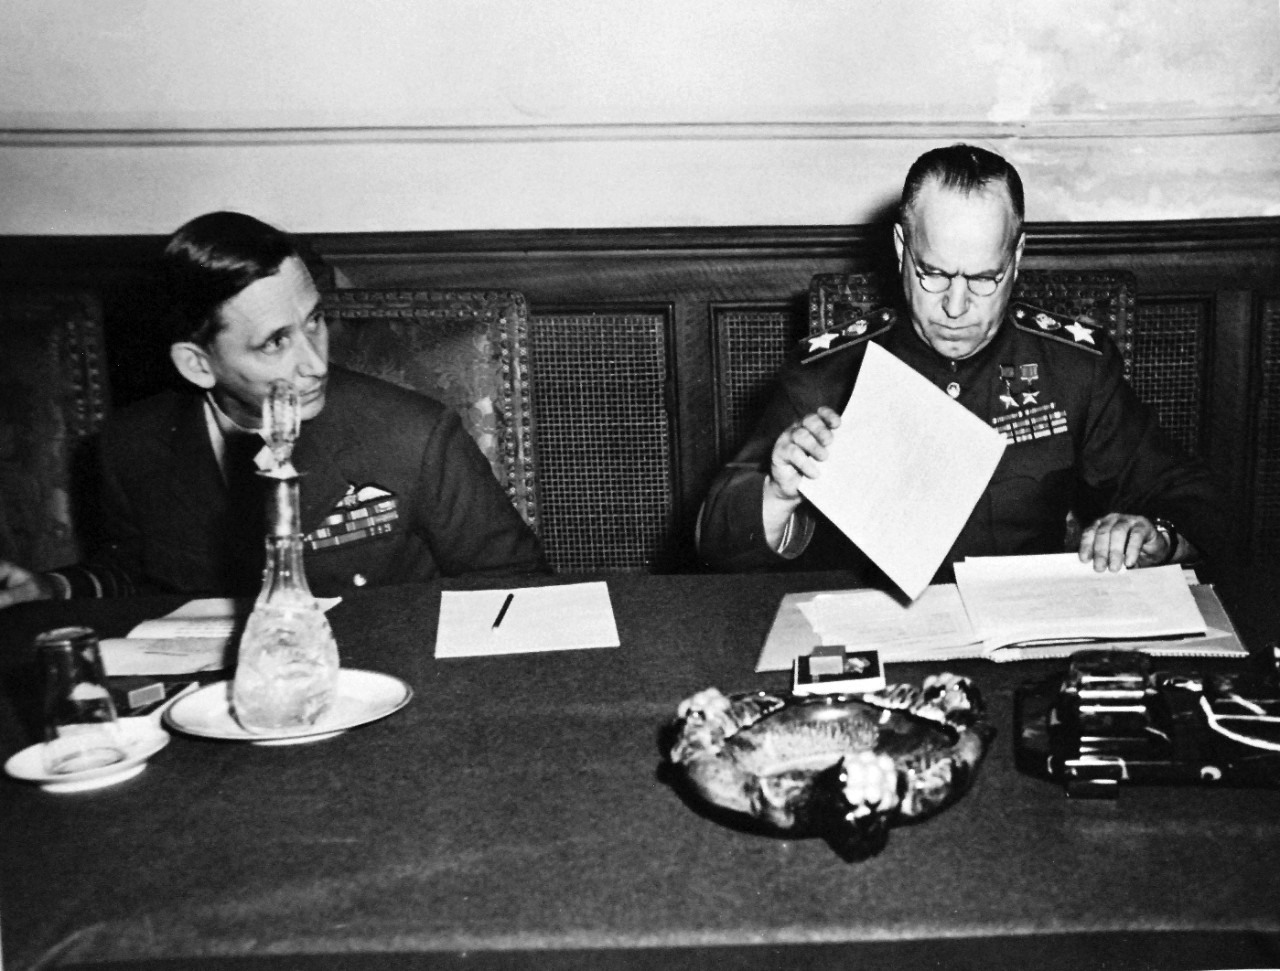 111-SC-27436: Surrender of Germany, 7 May 1945.  (Left to Right):  Air Chief Marshall Sir Arthur Tedder, Deputy Supreme Commander and Field Marshall George K. Zhukov, Deputy Commander in Chief of all Soviet forces, examines the ratified terms agreed upon at Reims, France, at Russian Headquarters in Berlin, Germany.  U.S. Army Photograph.  Courtesy of the Library of Congress Collection, Lot-8988. (2015/10/16).